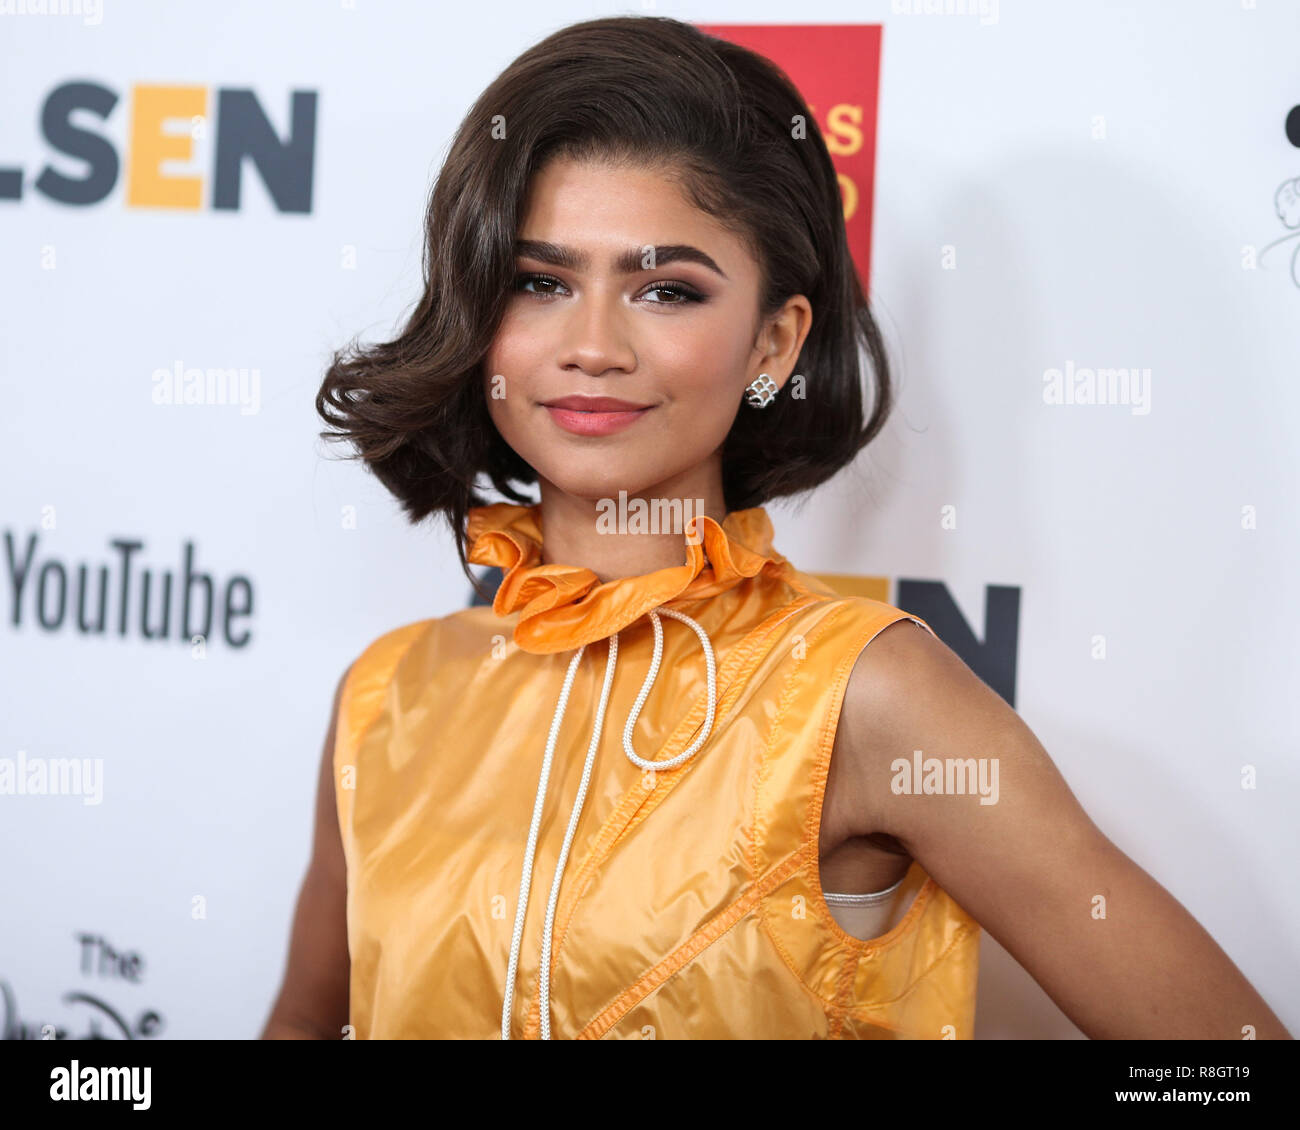 BEVERLY HILLS, LOS ANGELES, CA, USA - OCTOBER 20: Actress Zendaya wearing Calvin Klein with a Bulgari ring arrives at the 2017 GLSEN Respect Awards held at the Beverly Wilshire Four Seasons Hotel on October 20, 2017 in Beverly Hills, Los Angeles, California, United States. (Photo by Xavier Collin/Image Press Agency) Stock Photo